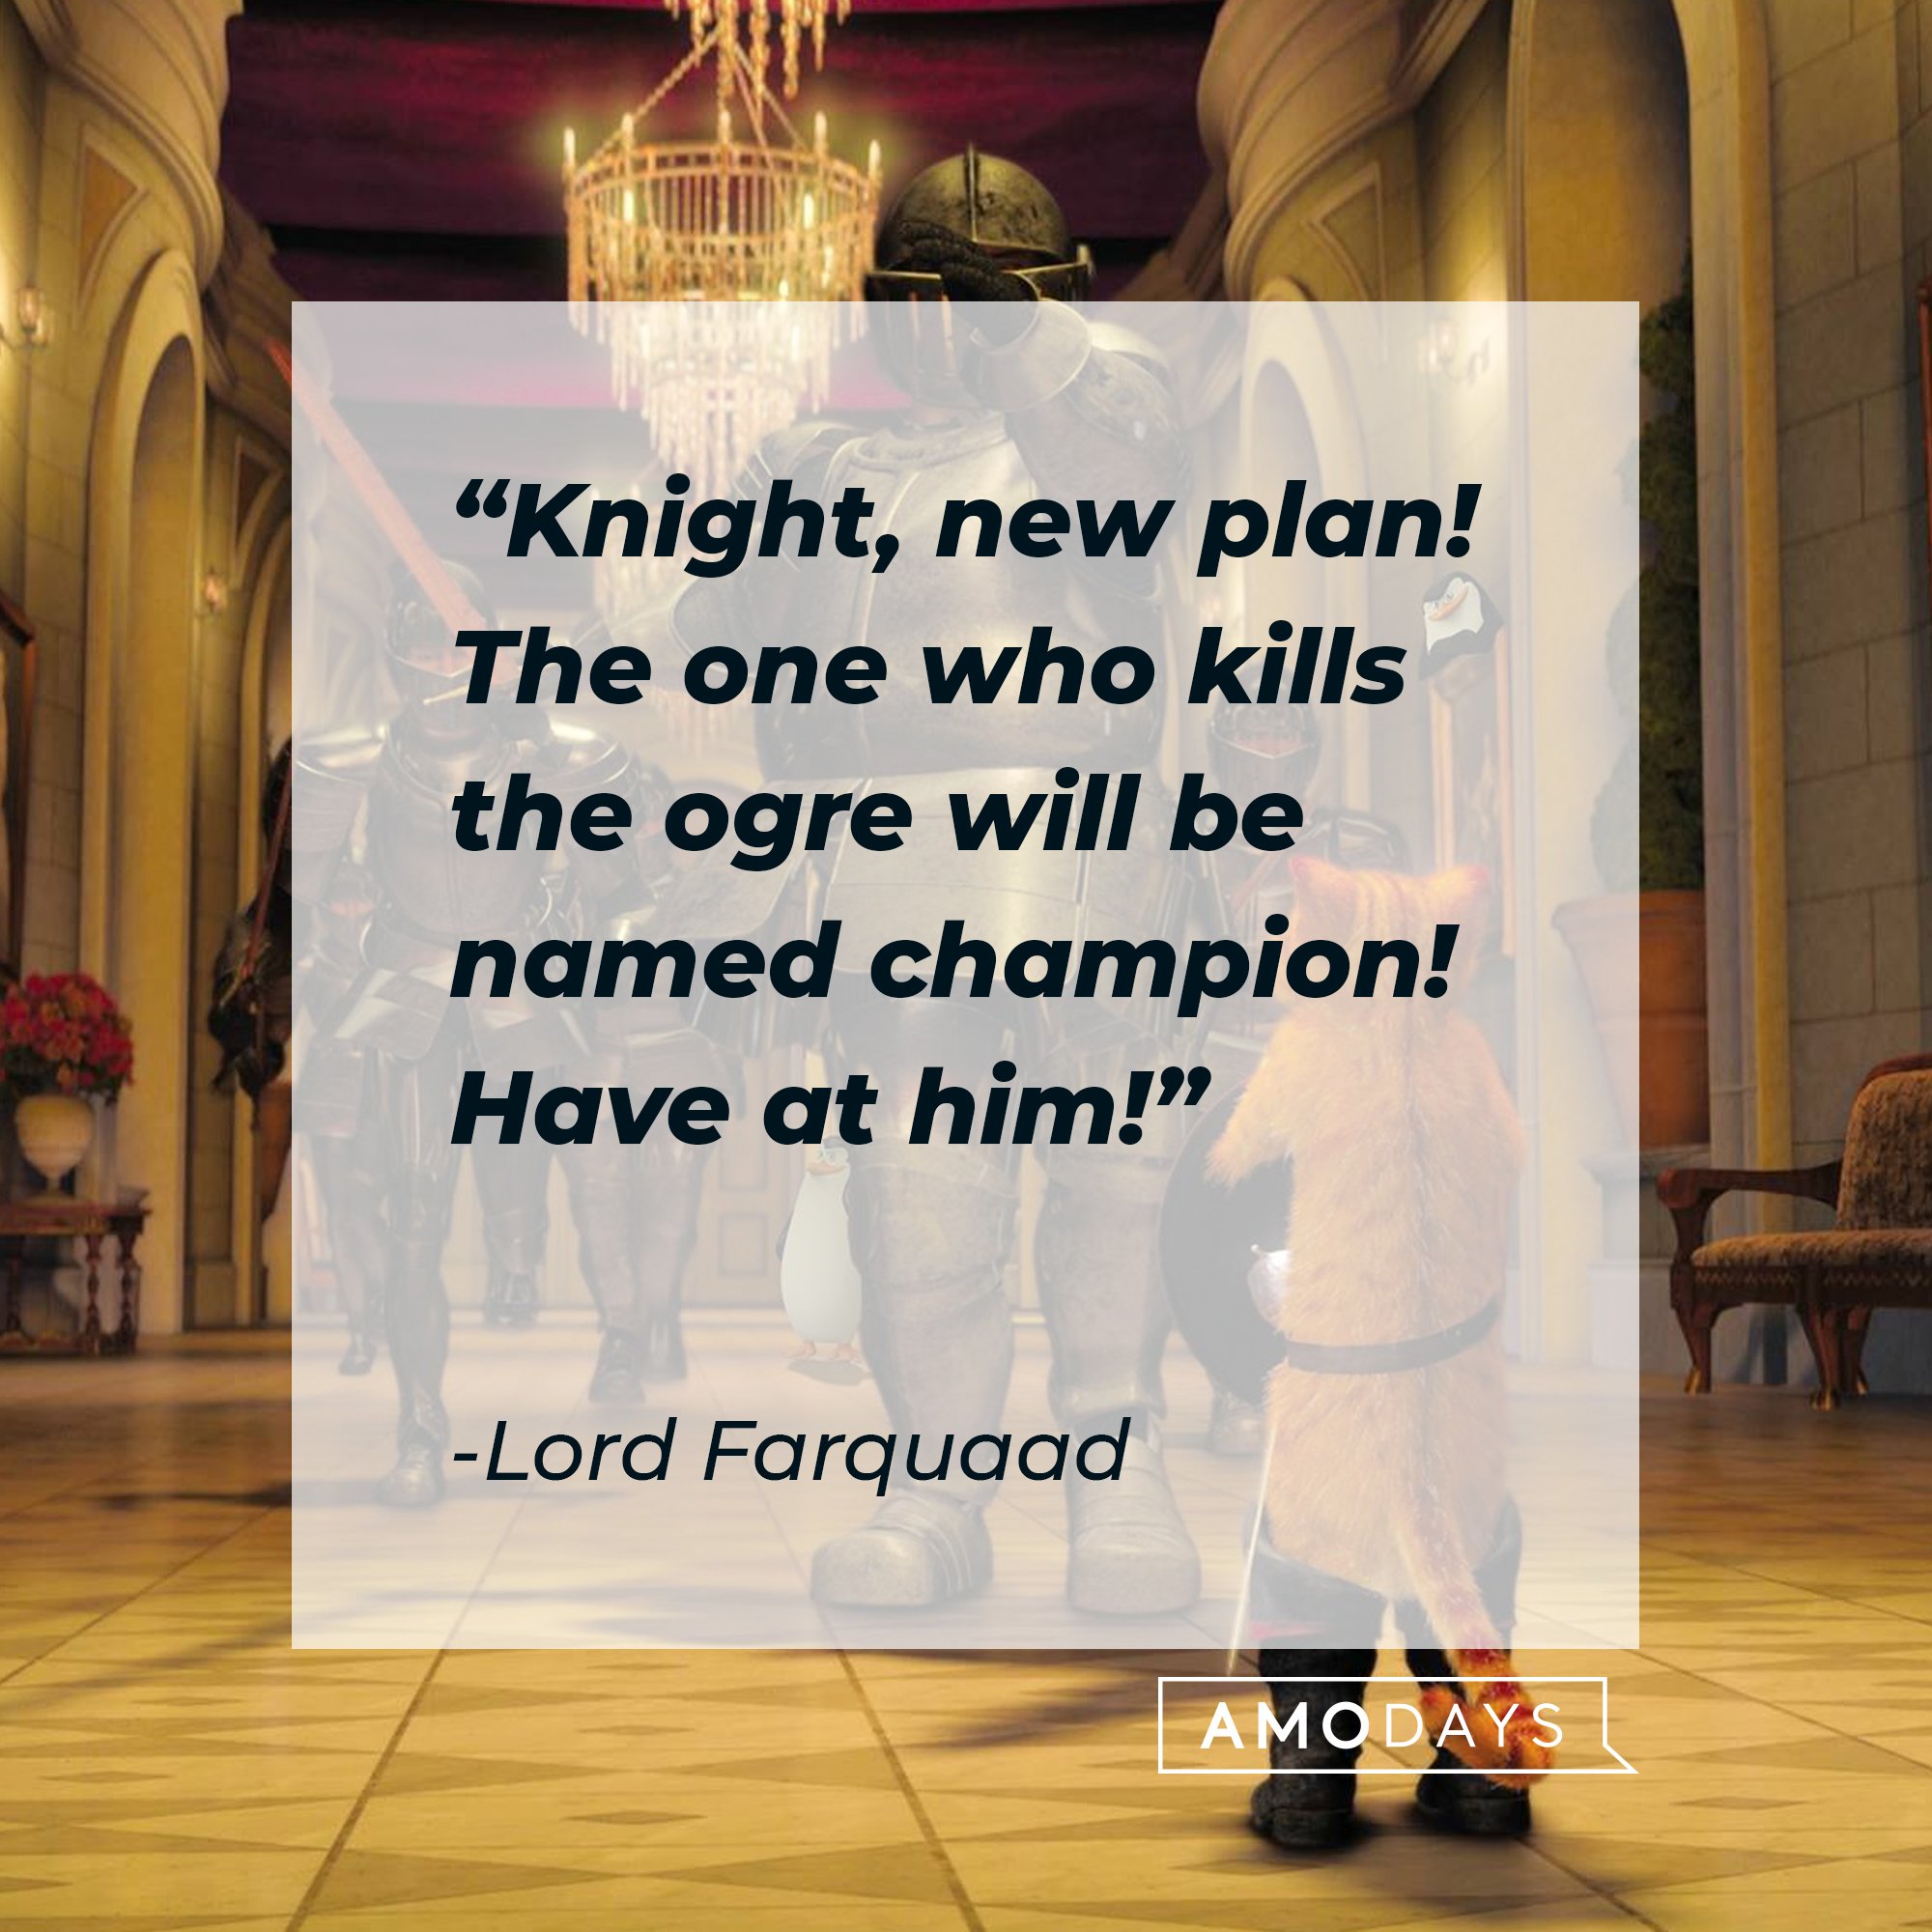 Lord Farquaad's quote: "Knight, new plan! The one who kills the ogre will be named champion! Have at him!" | Image: AmoDays 